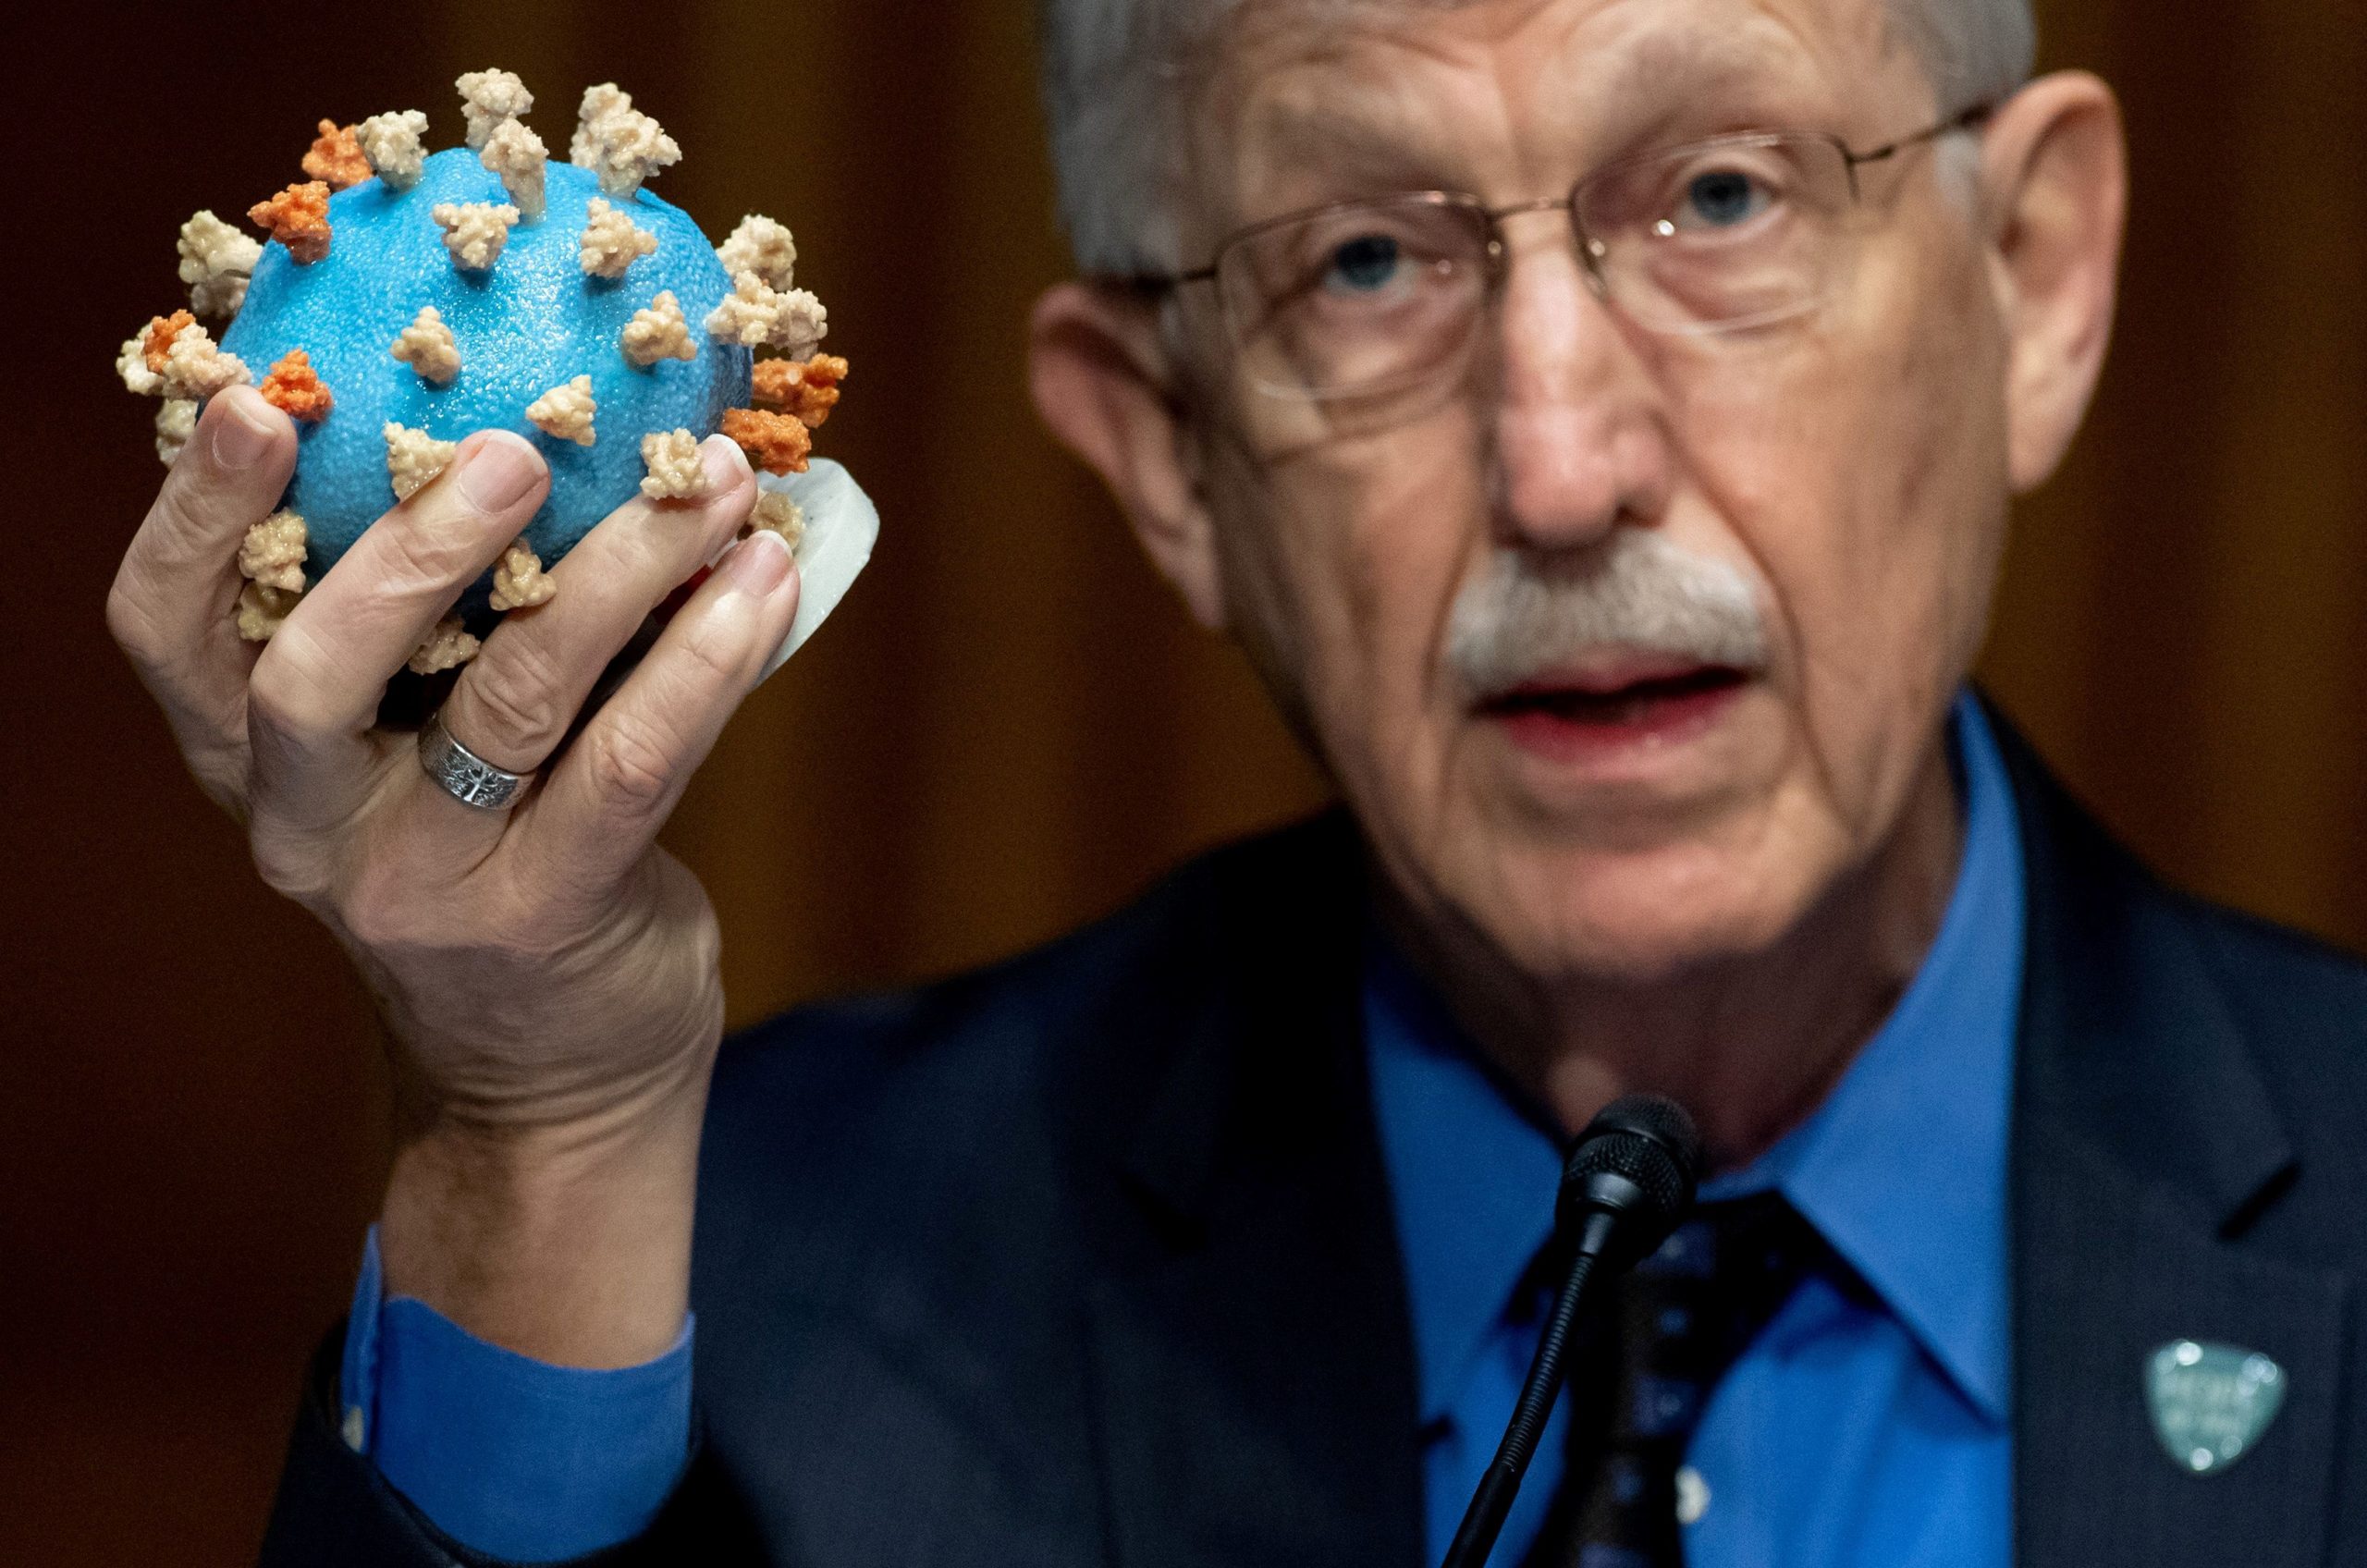 FILE PHOTO: Dr Francis Collins, director of the National Institutes of Health (NIH), holds up a model of SARS-CoV-2, known as the novel coronavirus,  during a U.S. Senate Appropriations Subcommittee Hearing on the plan to research, manufacture and distribute a coronavirus vaccine, known as Operation Warp Speed on Capitol Hill in Washington, D.C, U.S., July 2, 2020. Saul Loeb/Pool via REUTERS/File Photo - RC2BYH9UYBY3